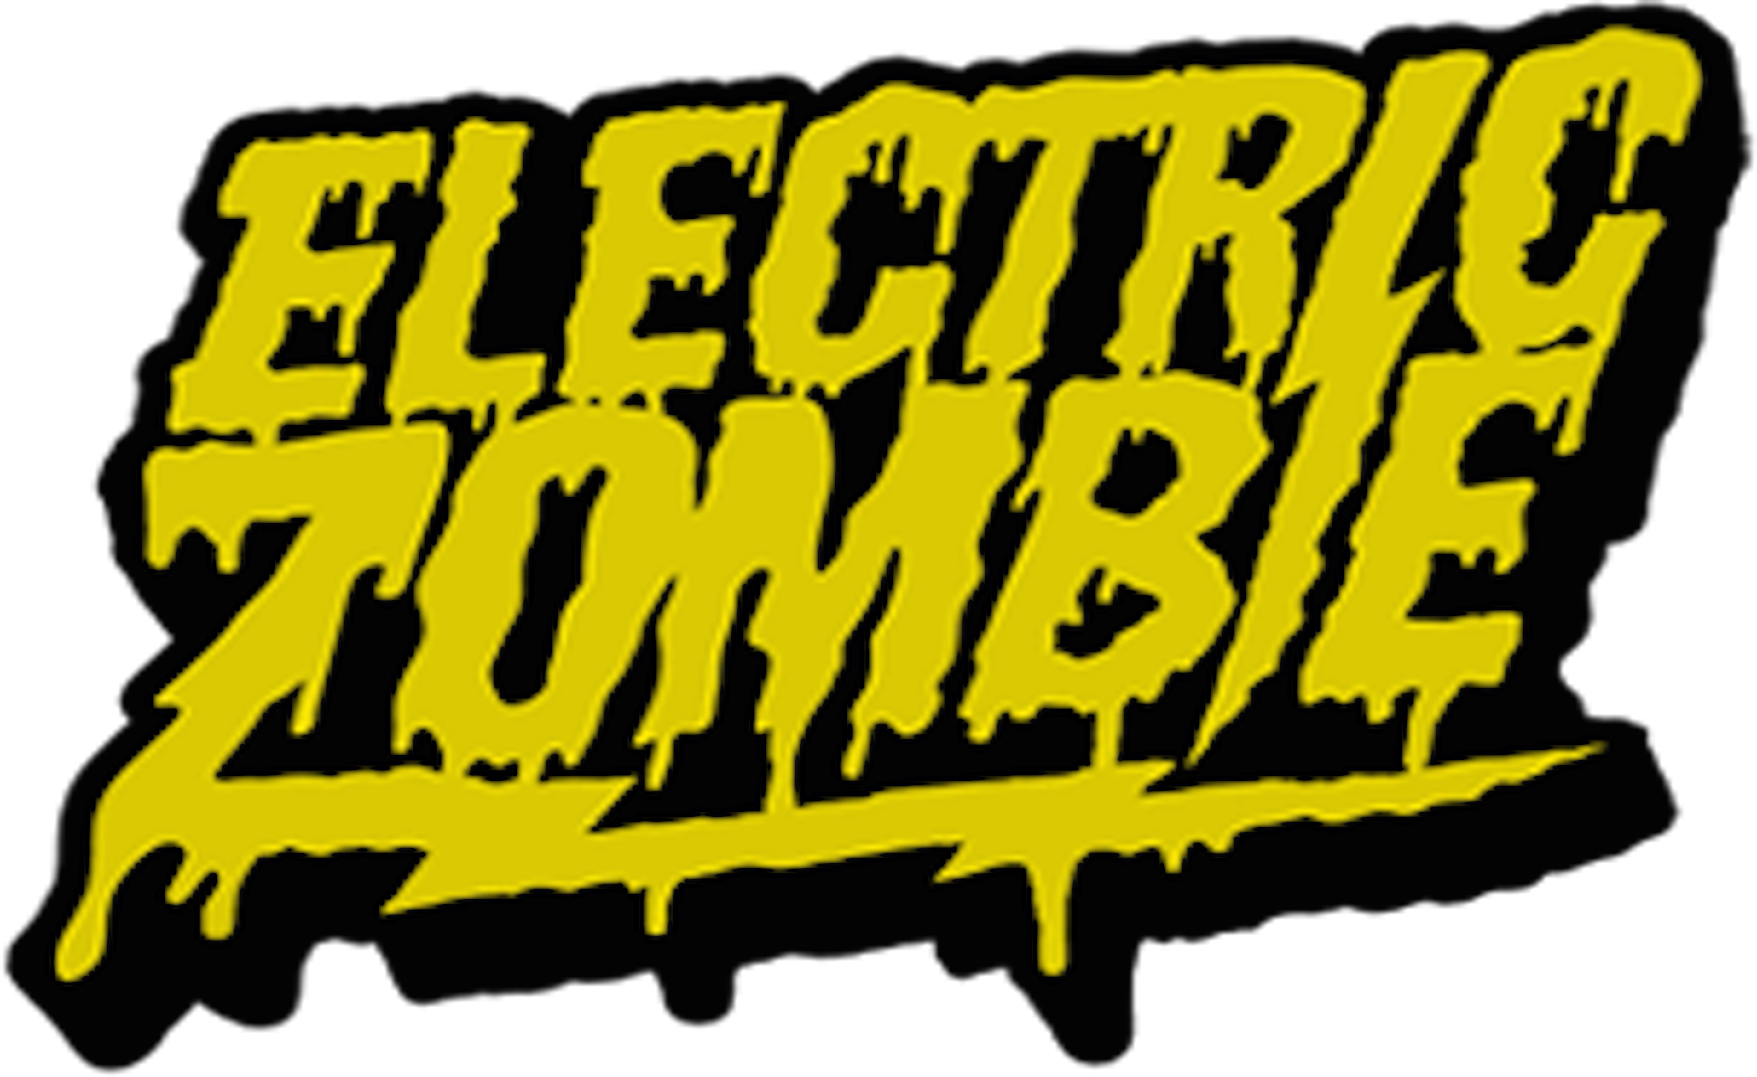 Electric Zombie Celebrates Friday The 13th With Who - Electric Zombie Logo (1757x1077)